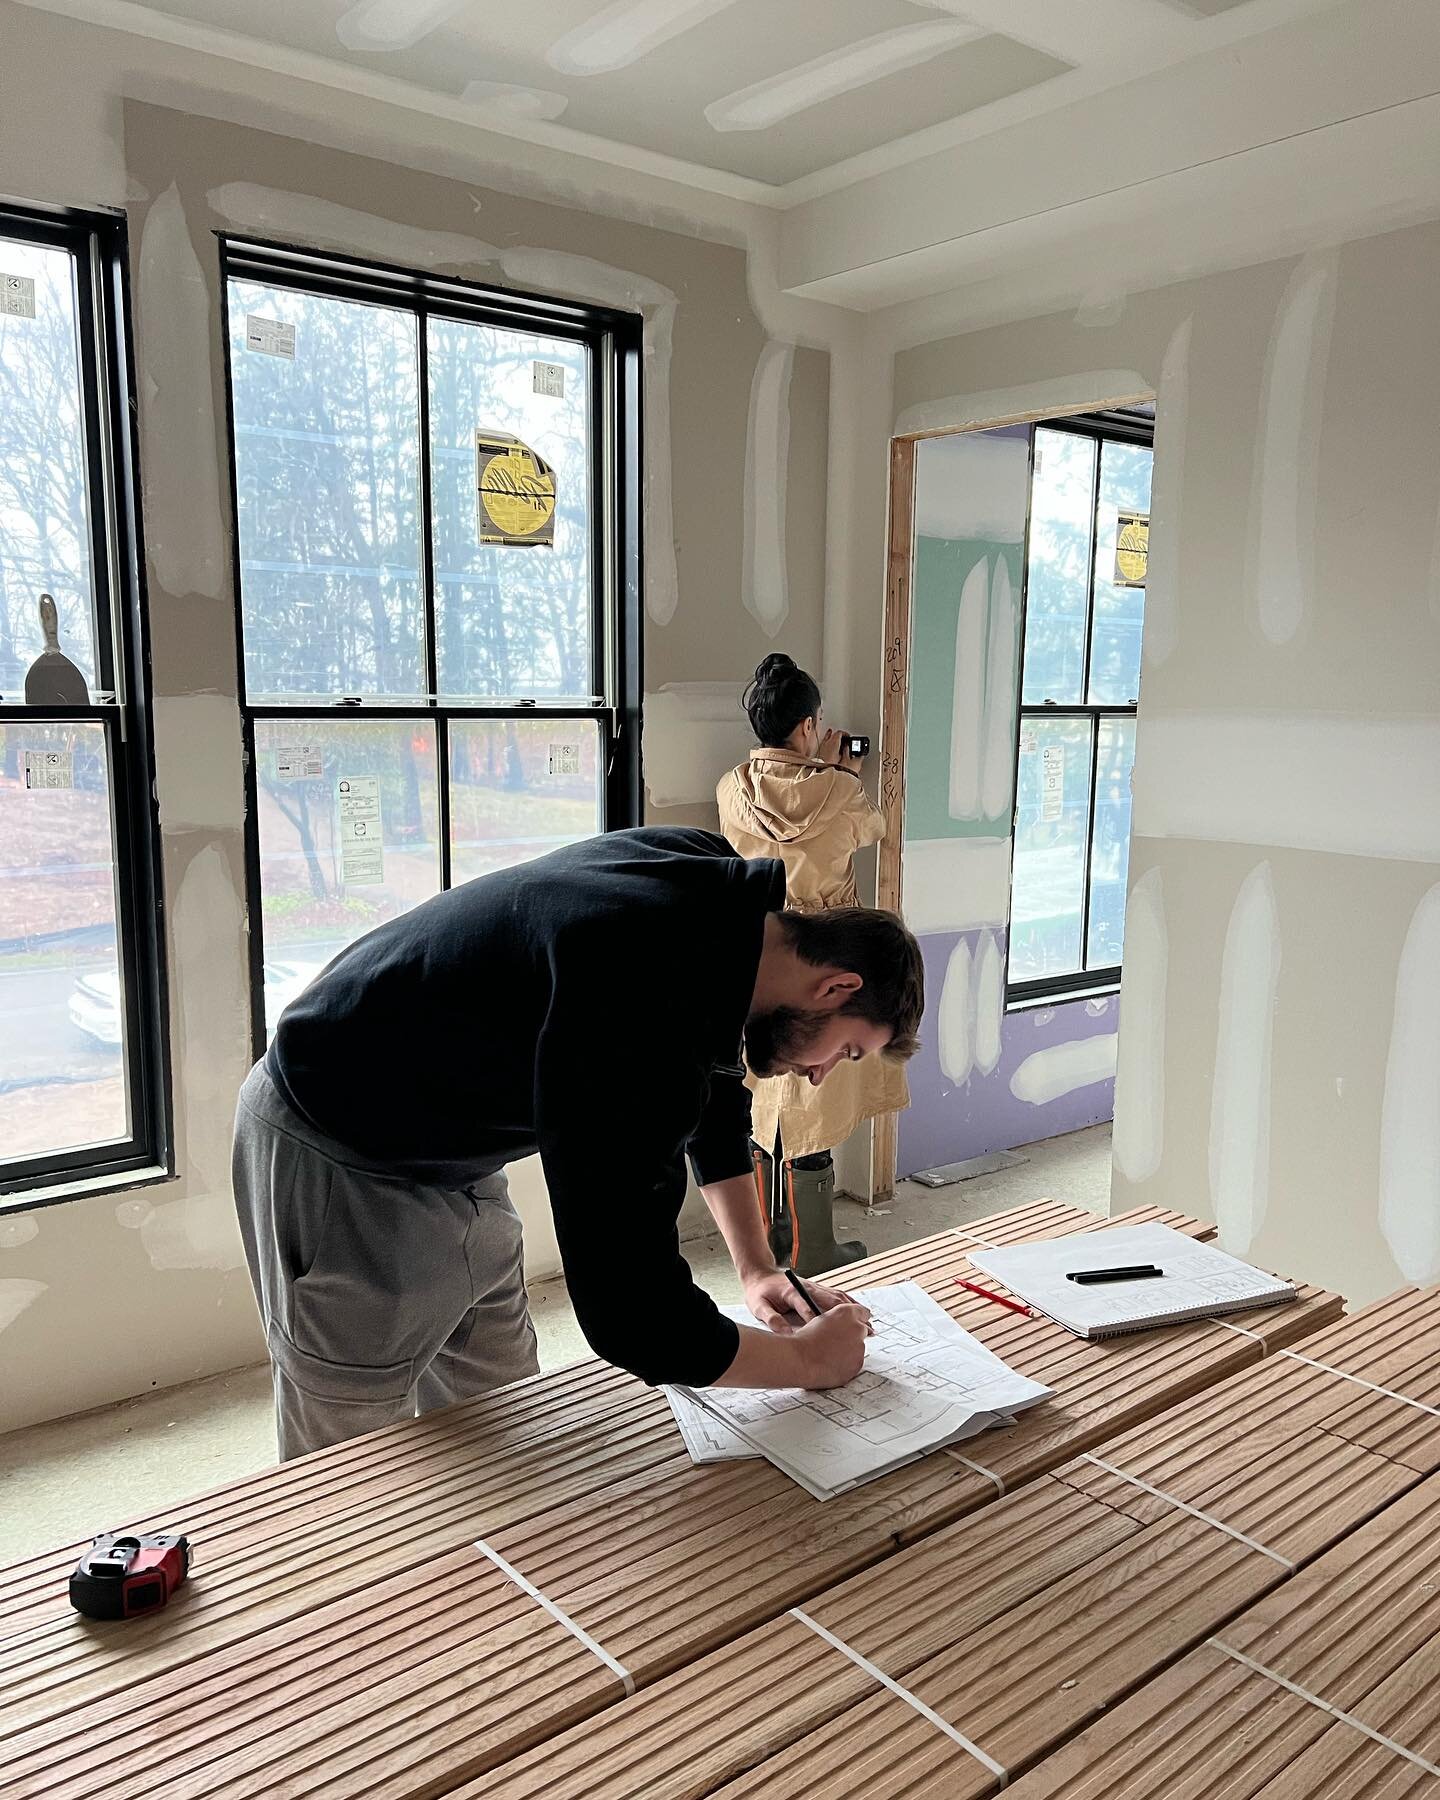 Site survey day 2 in Alpine 🏡

Even in a new construction home, a thorough design team is taking as- built measurements to ensure the build was constructed according to architectural plans.

Any deviations from plans must be memorialized so all desi